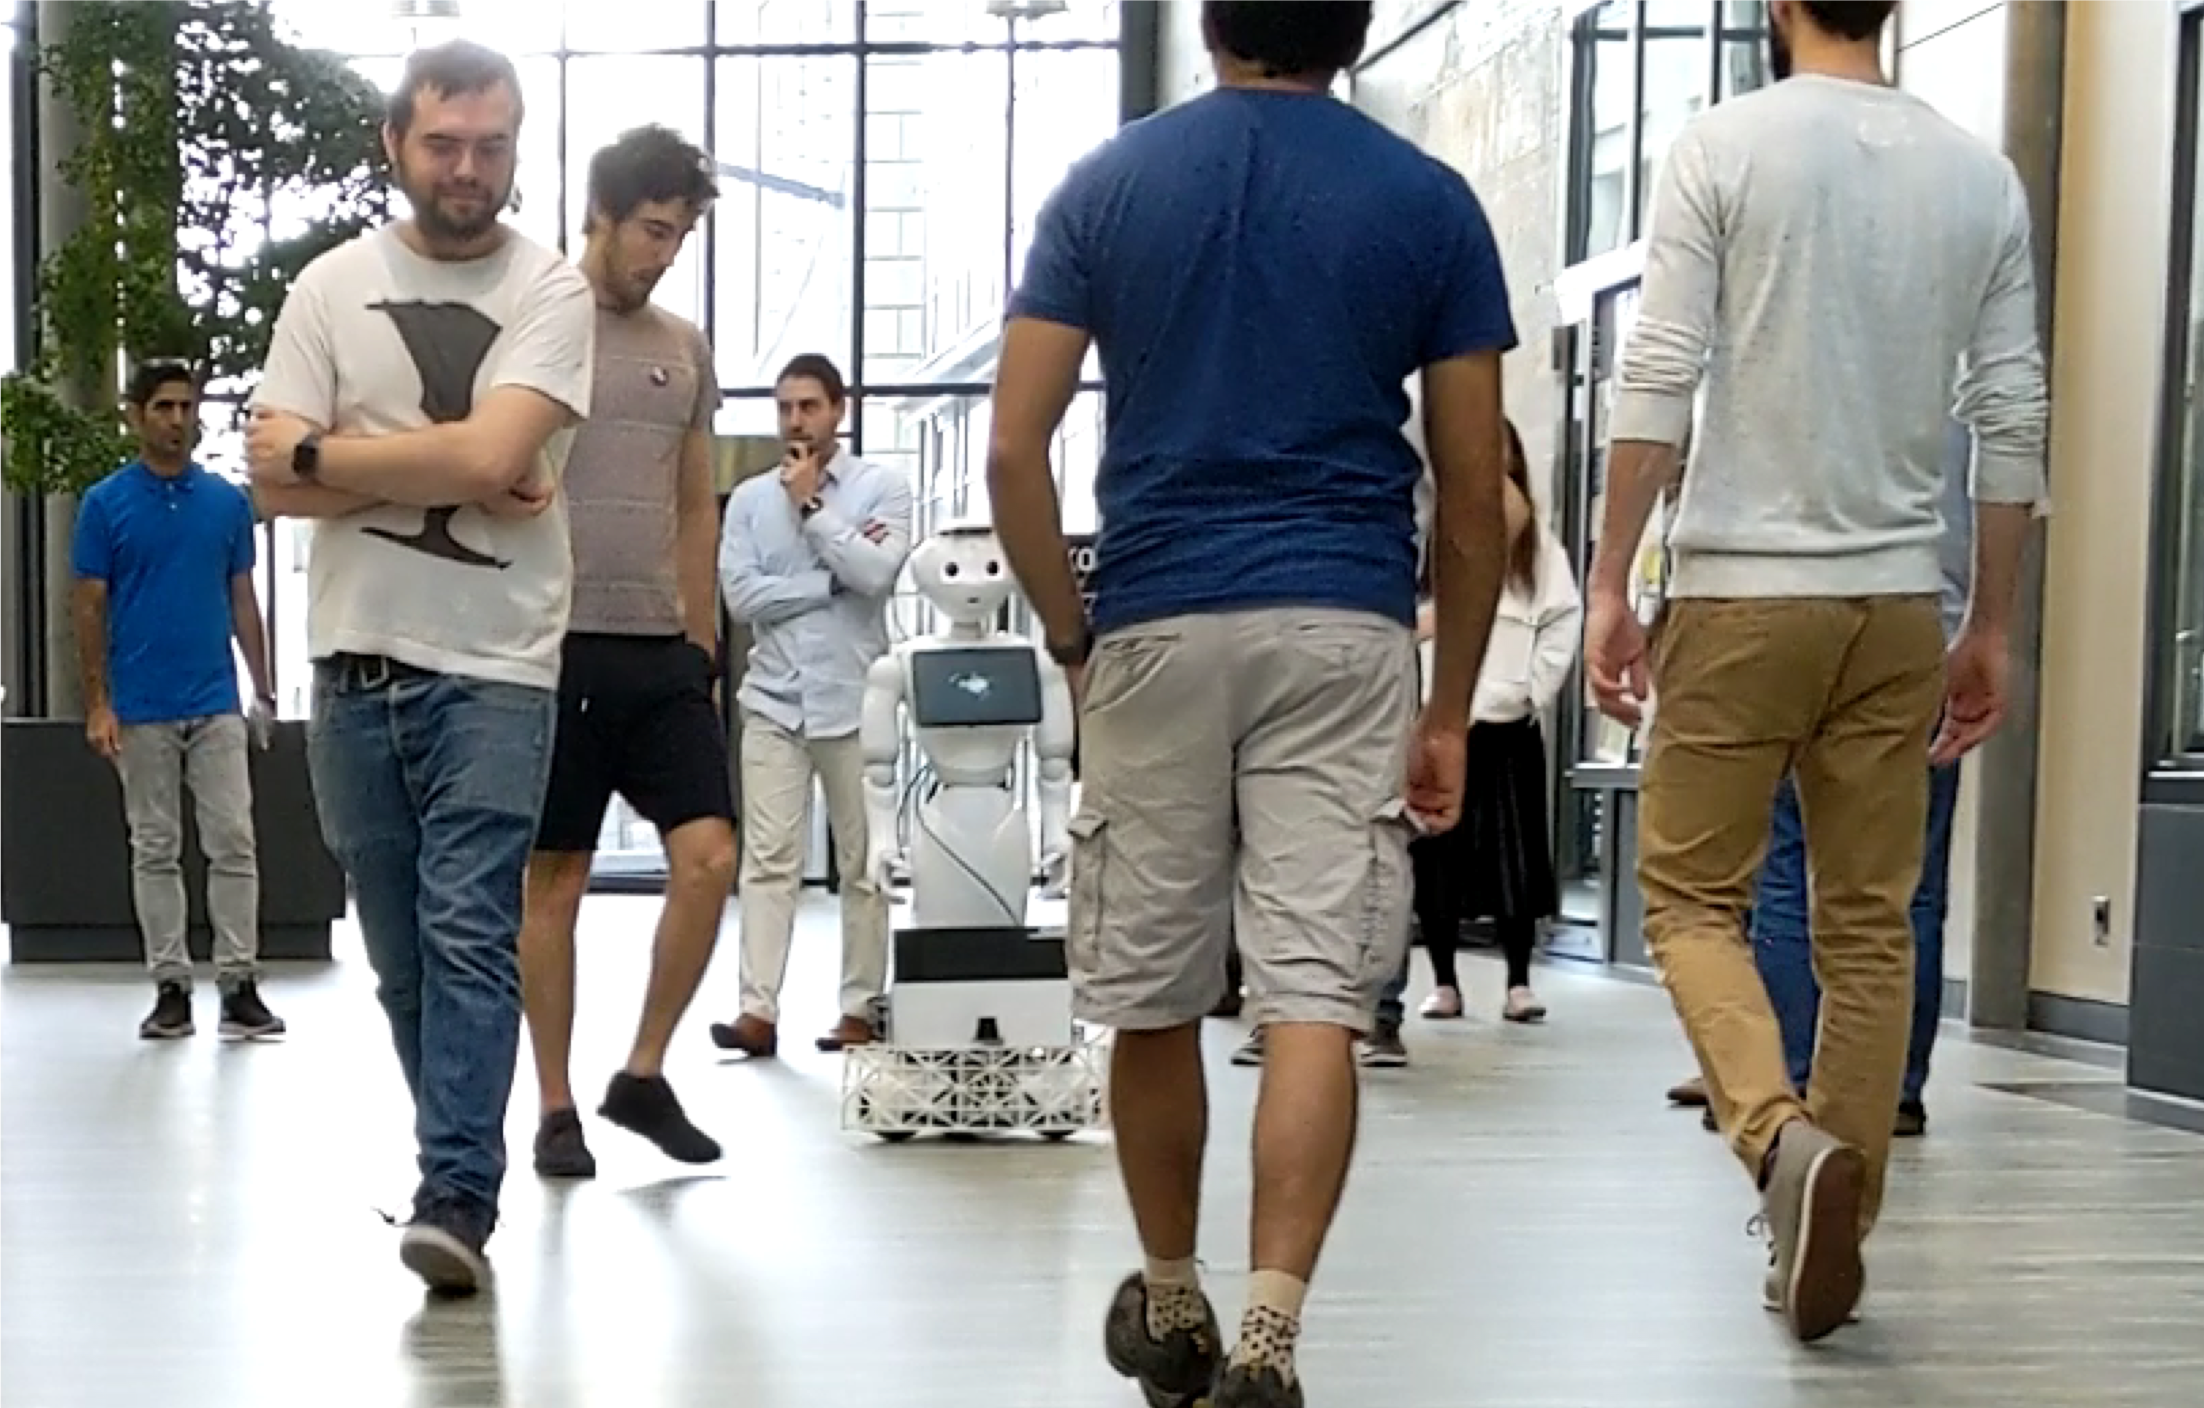 <b>Safe Robot Navigation in Dense Crowds</b><p>Navigating through human crowds is a tough challenge for a robot. Crowds can cause severe sensor occlusions and often don't leave much free space for the robot to move in, leading to what's known as the 'freezing robot problem'. As part of the European Commisssion H2020 CrowdBot Project, we are developing navigation and motion plannng algorithms that allow the robot to work with the flow of the crowd to get to its destination. We work on mapping, localisation, prediction, motion and interaction planning to help the robot answer four key questions for successful robot crowd navigation:</p><p>1. Where am I?</p><p>2. Who's around me?</p><p>3. Where am I going?</p><p>4. How should I get there?</p>